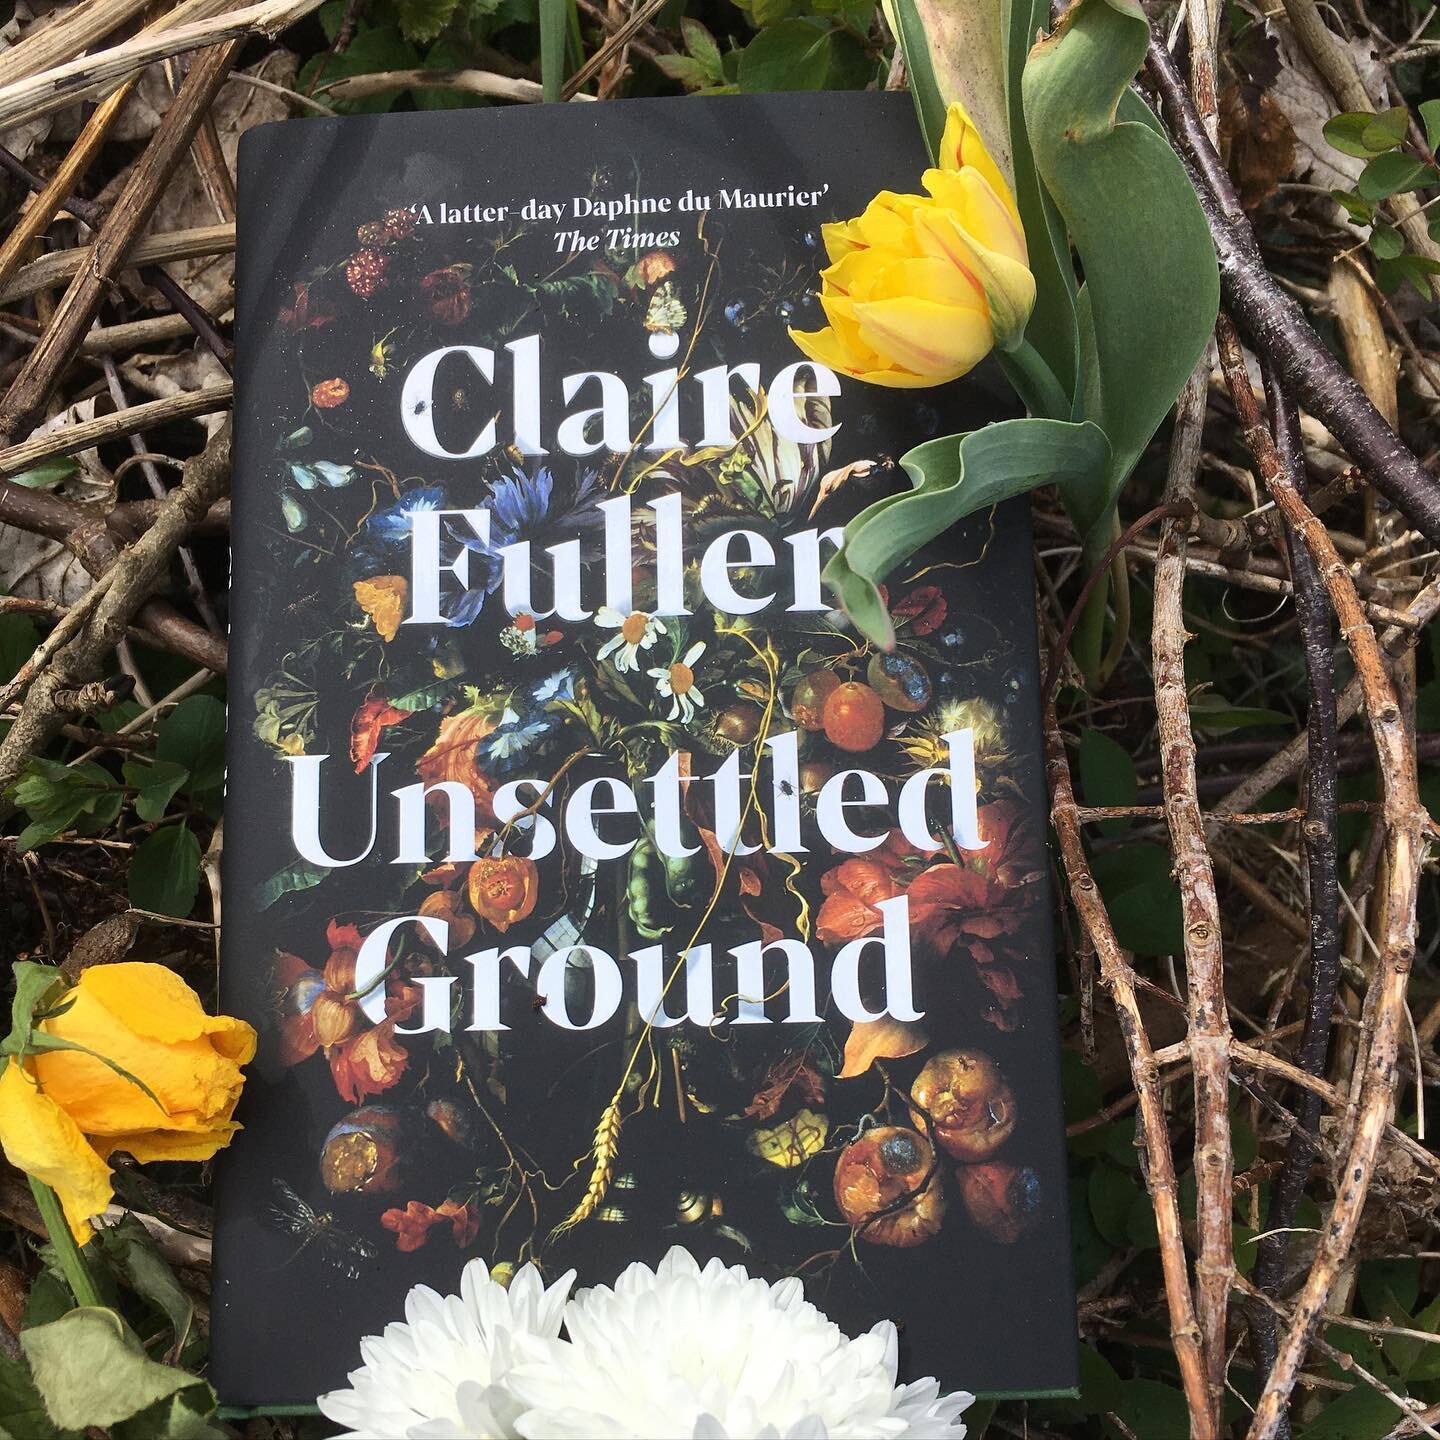 So excited to chat with @writerclairefuller tomorrow evening at our virtual event. Unsettled Ground is long listed for the Women&rsquo;s Prize for Fiction and is a really great exploration of a family in crisis, dealing with the revelation of deep se